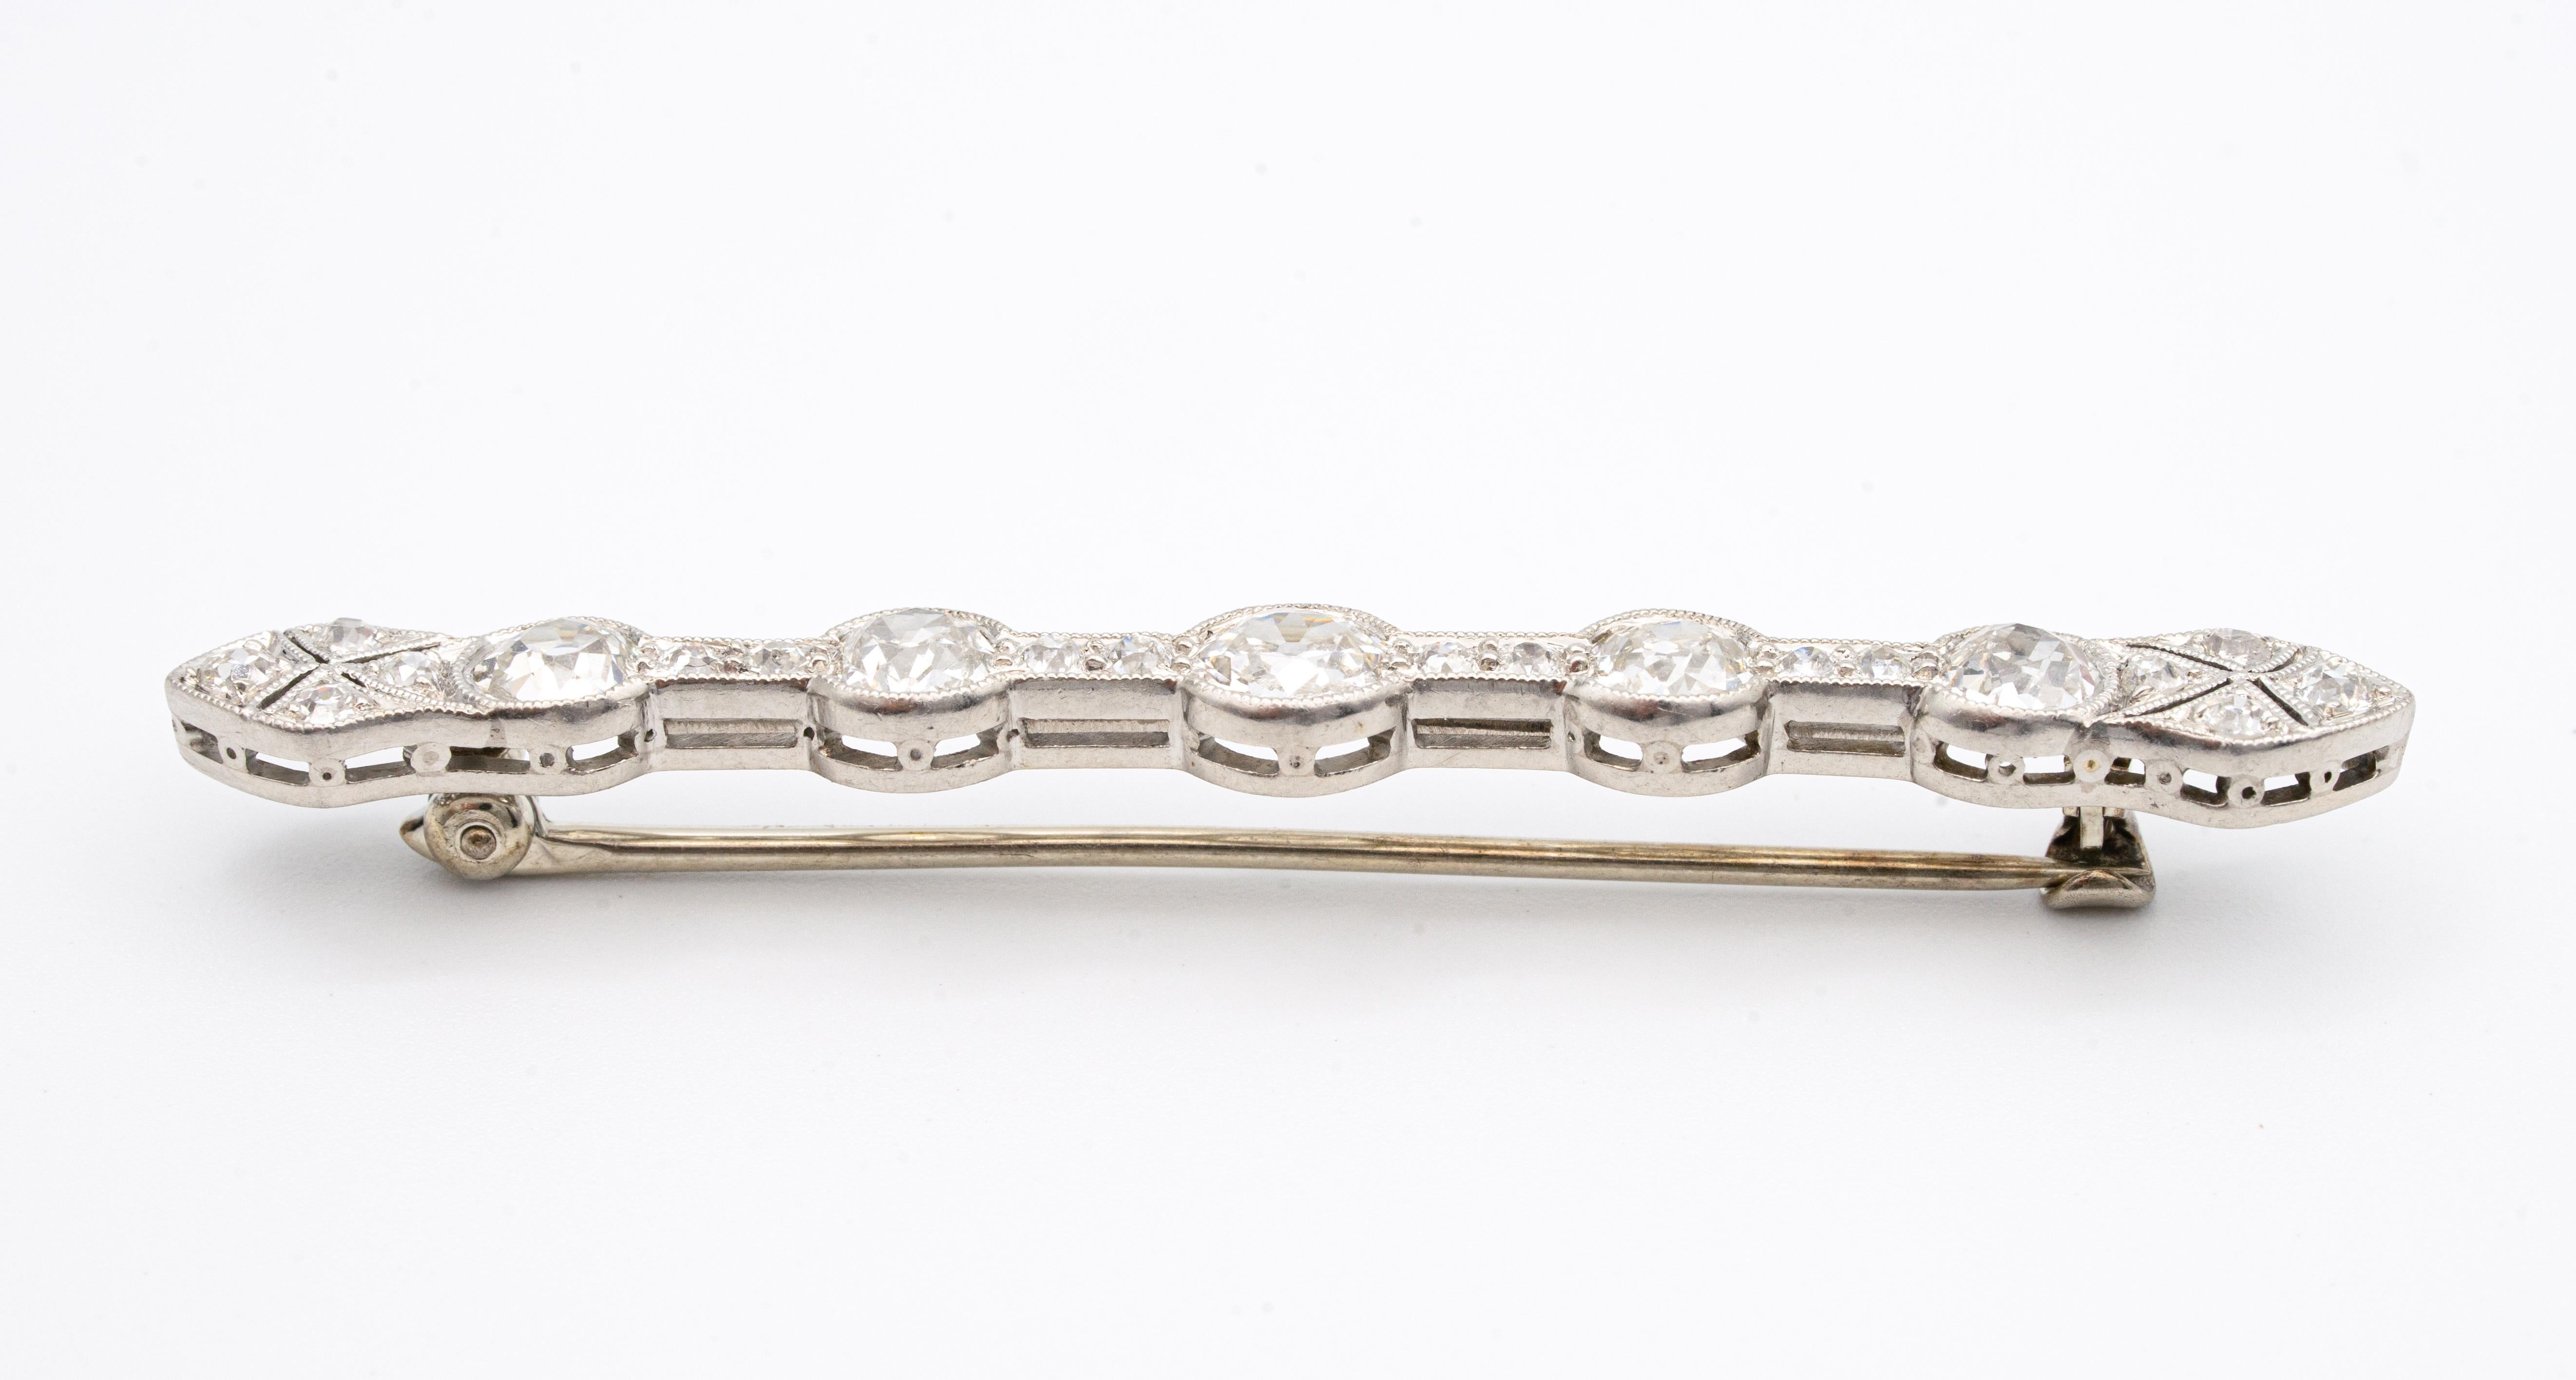 Art Deco barpin finely crafted in platinum with 5 large old-mine cut diamonds  graced as the center of this elegant pin accented by an additional 16 old European-cut diamonds and milgrain filigree finish. The center old mine diamond weighs